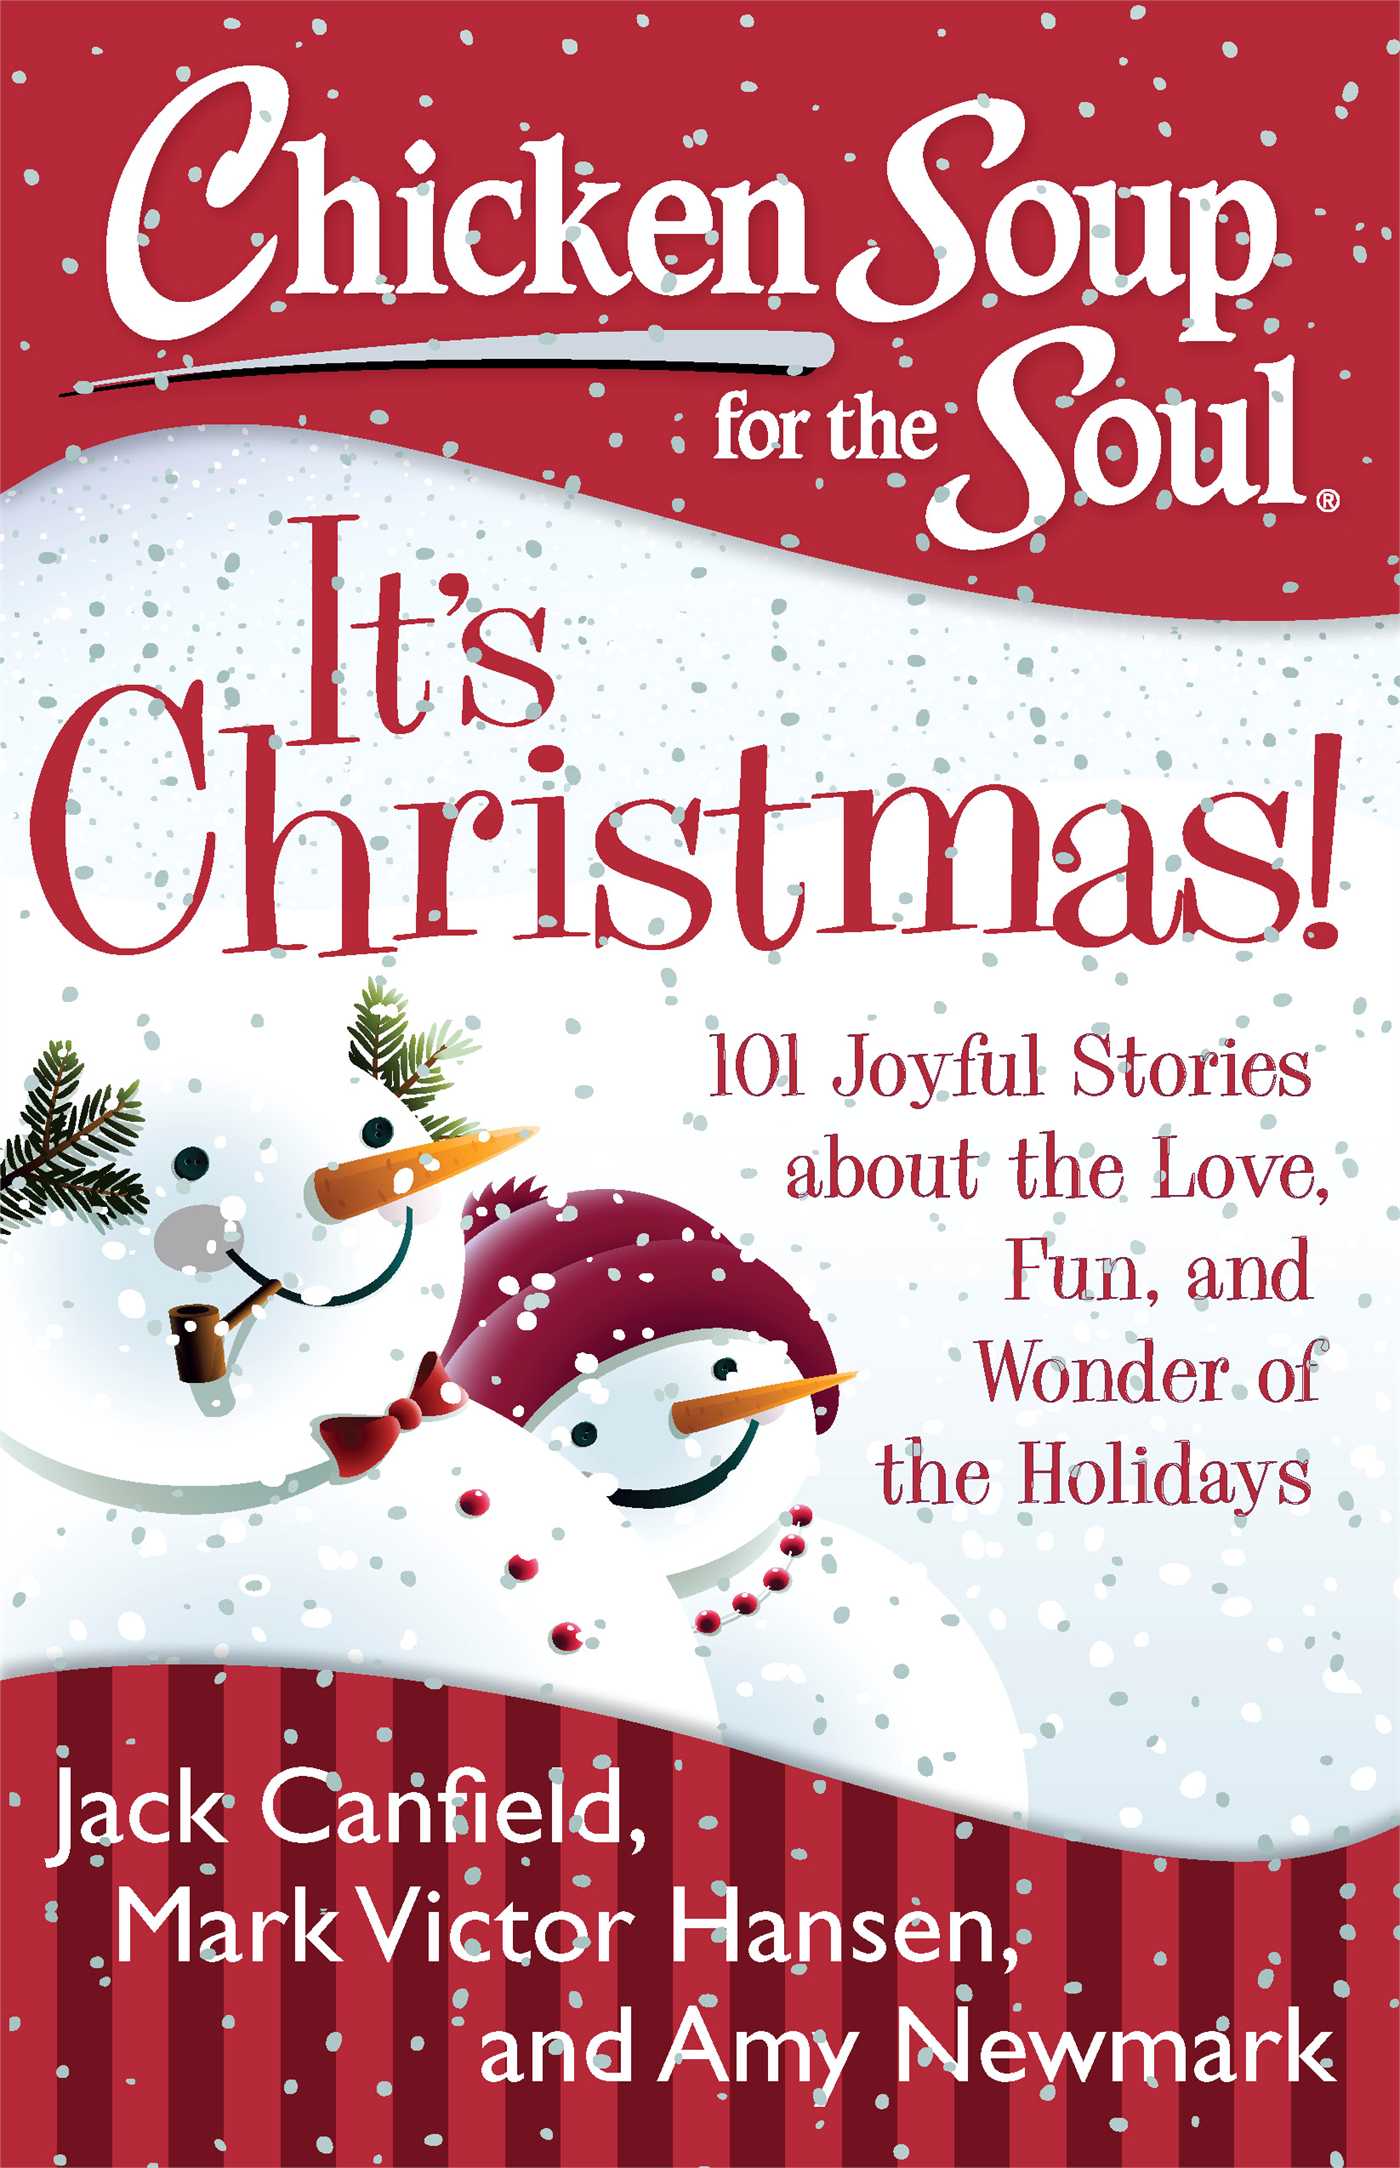 Chicken Soup for the Soul: It's Christmas! : 101 Joyful Stories about the Love, Fun, and Wonder of the Holidays (Paperback) - image 1 of 1